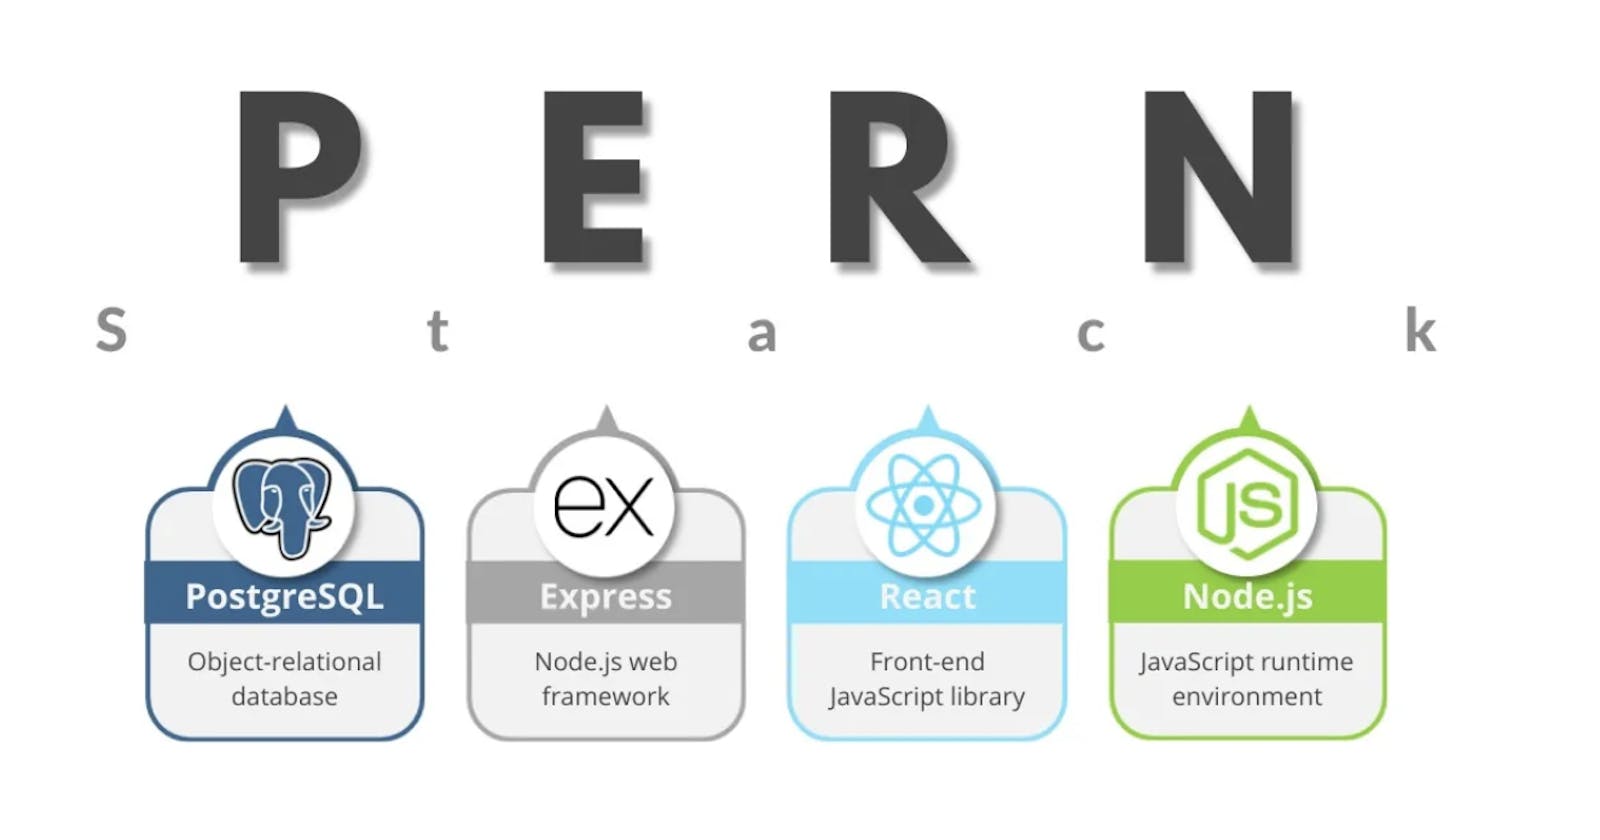 PERN Stack Series 1: How To Get Started With The PERN Stack